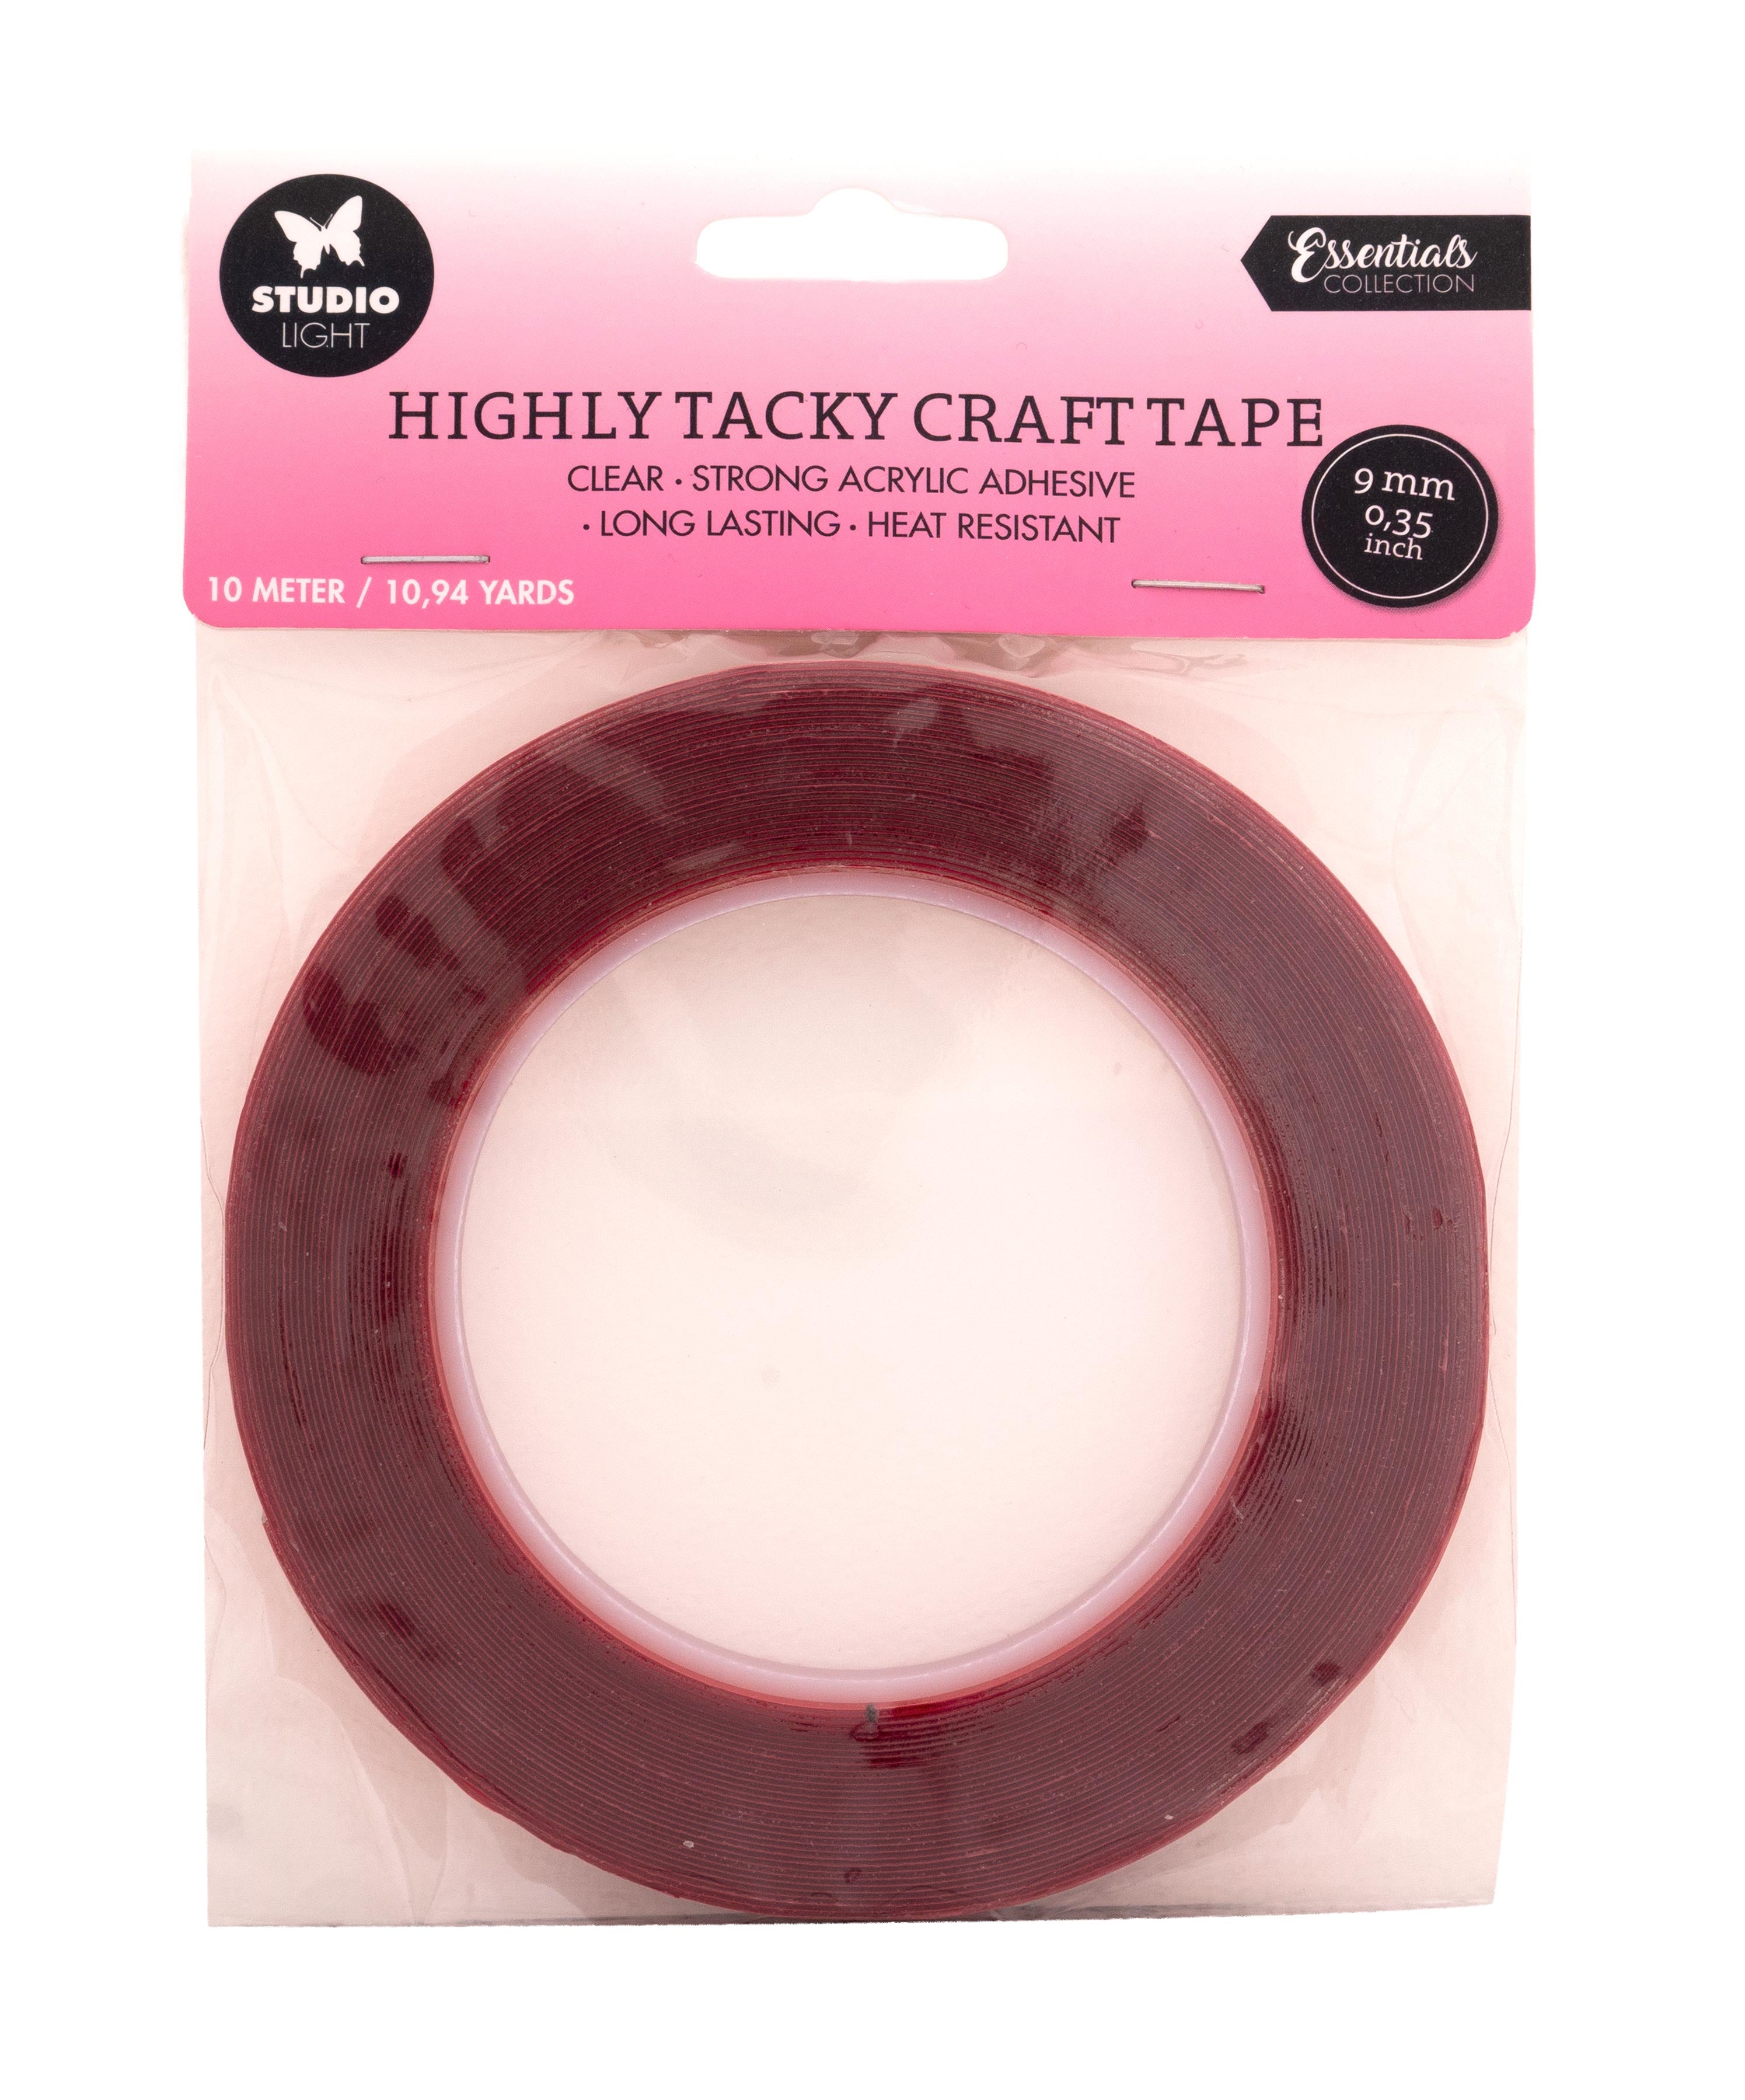 SL Highly Tacky Craft Tape Doublesided Adhesive 9mm Essential Tools 165x130x9mm 10 M nr.03